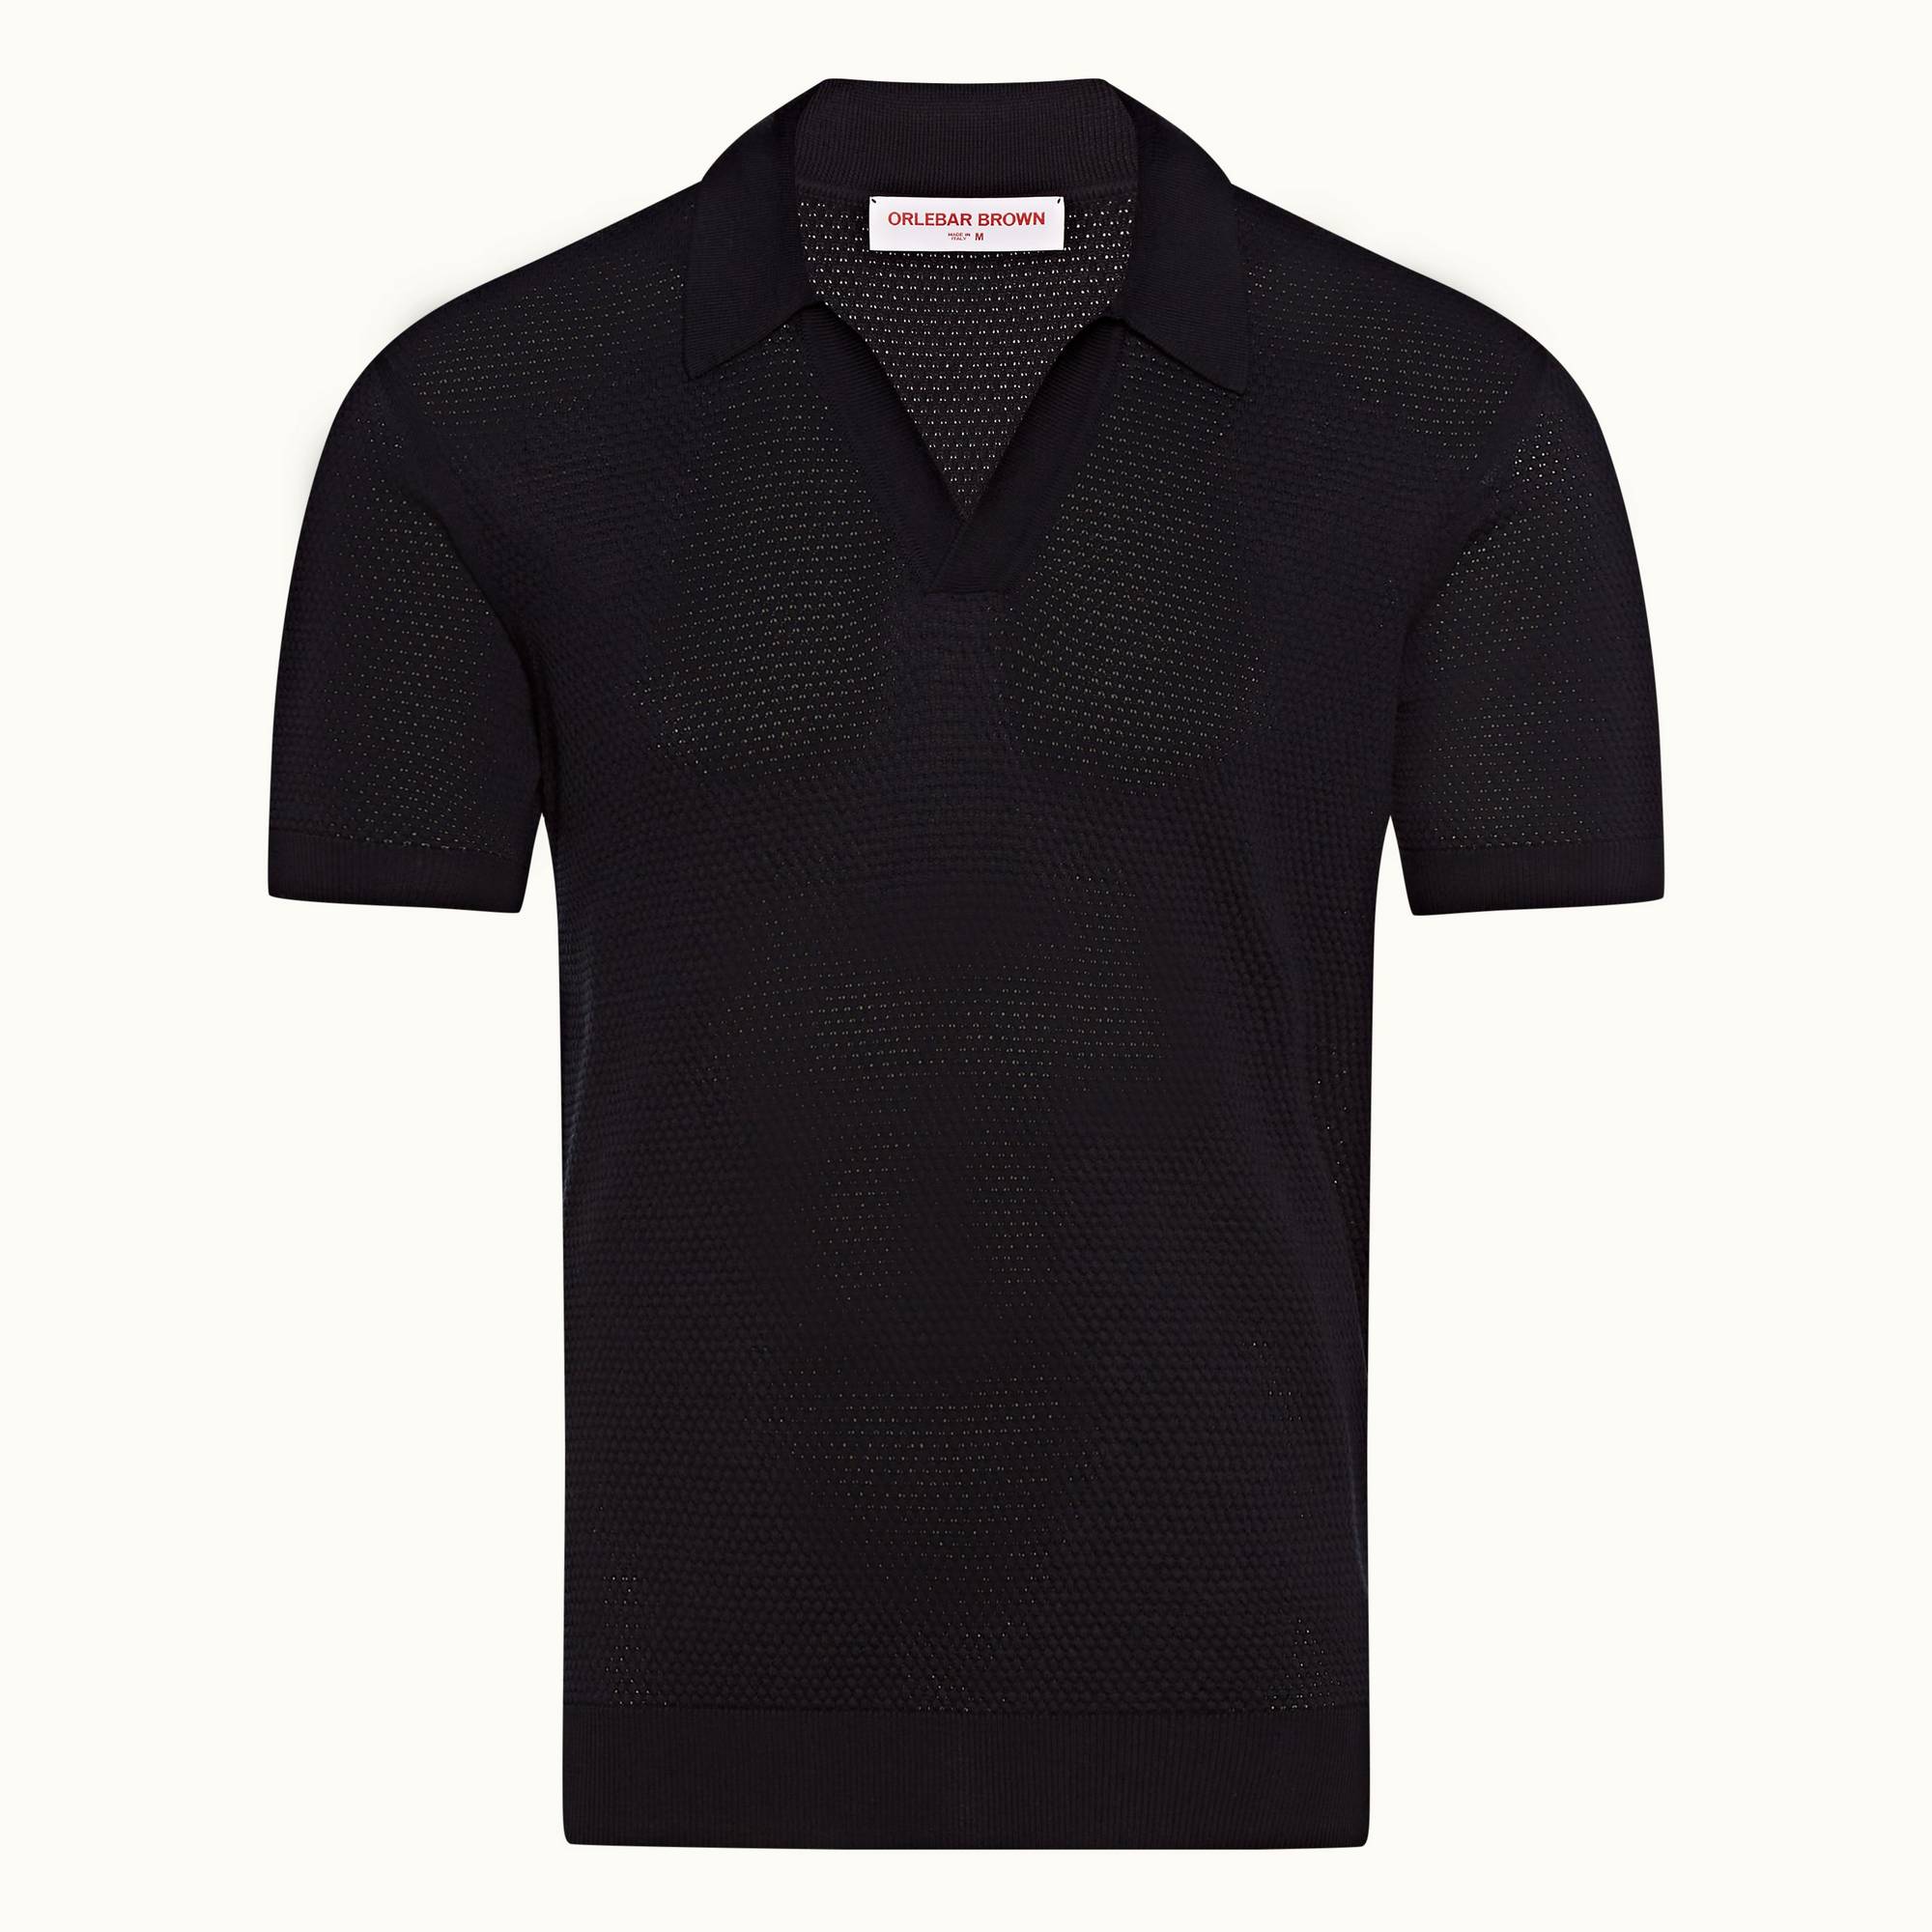 Galliot - Mens Ink Tailored Fit Knitted Cotton Polo Shirt